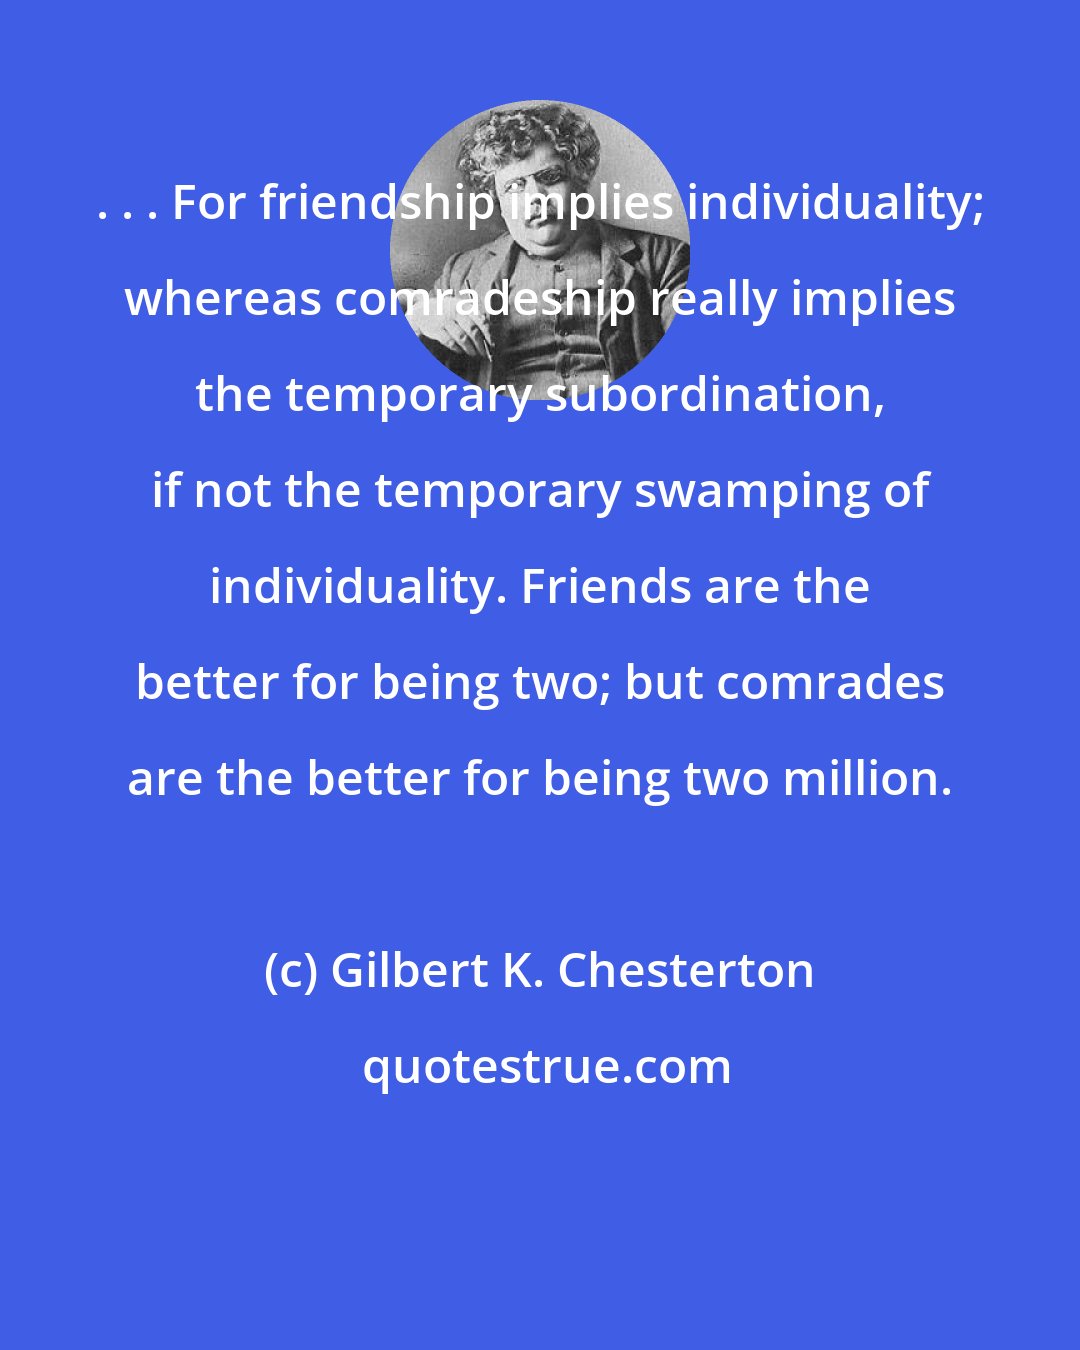 Gilbert K. Chesterton: . . . For friendship implies individuality; whereas comradeship really implies the temporary subordination, if not the temporary swamping of individuality. Friends are the better for being two; but comrades are the better for being two million.